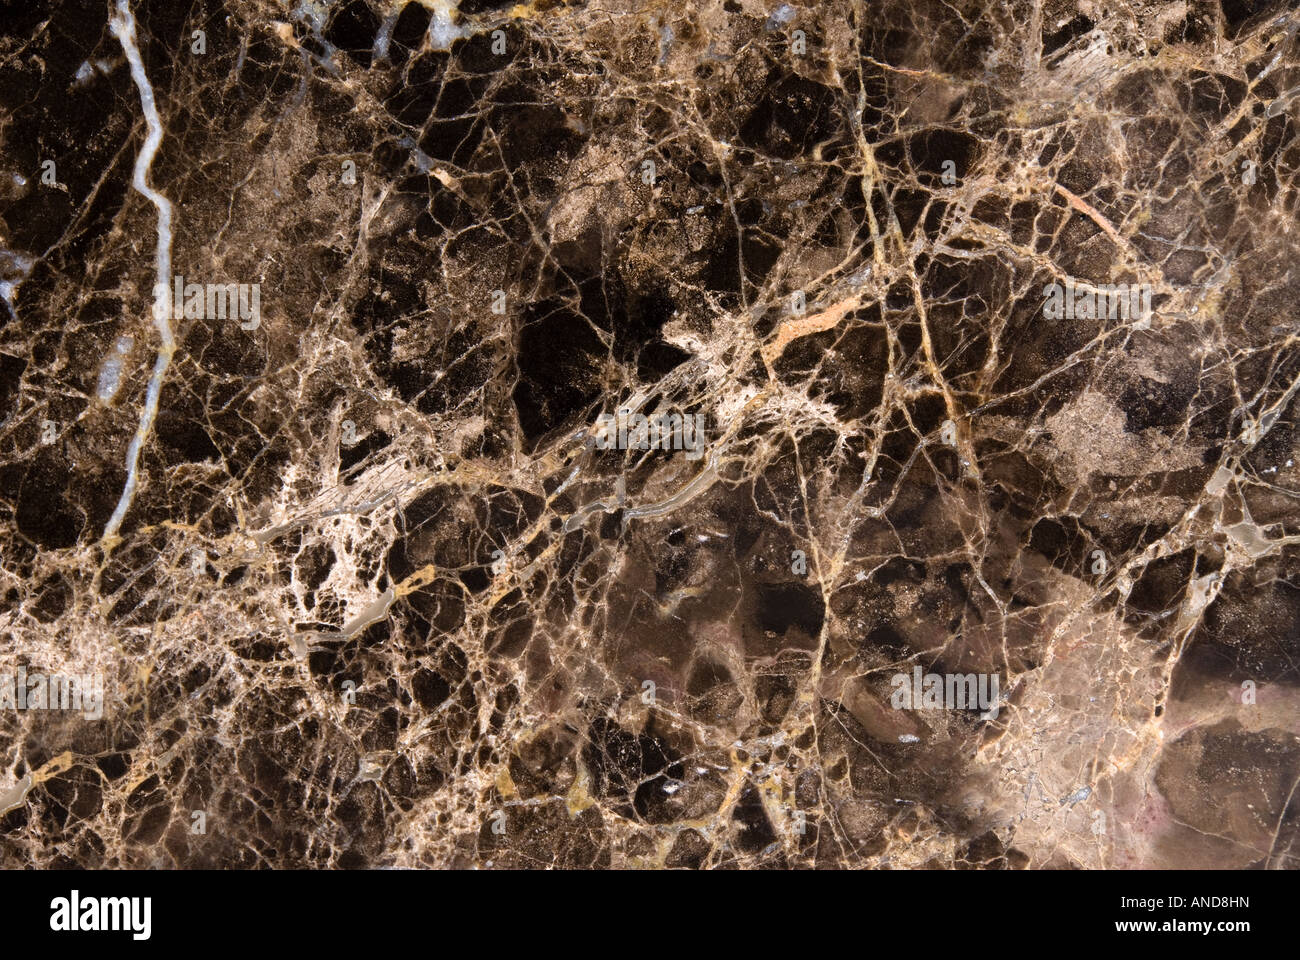 Black marble countertop shows excellent detail of the veins and colored patches Stock Photo